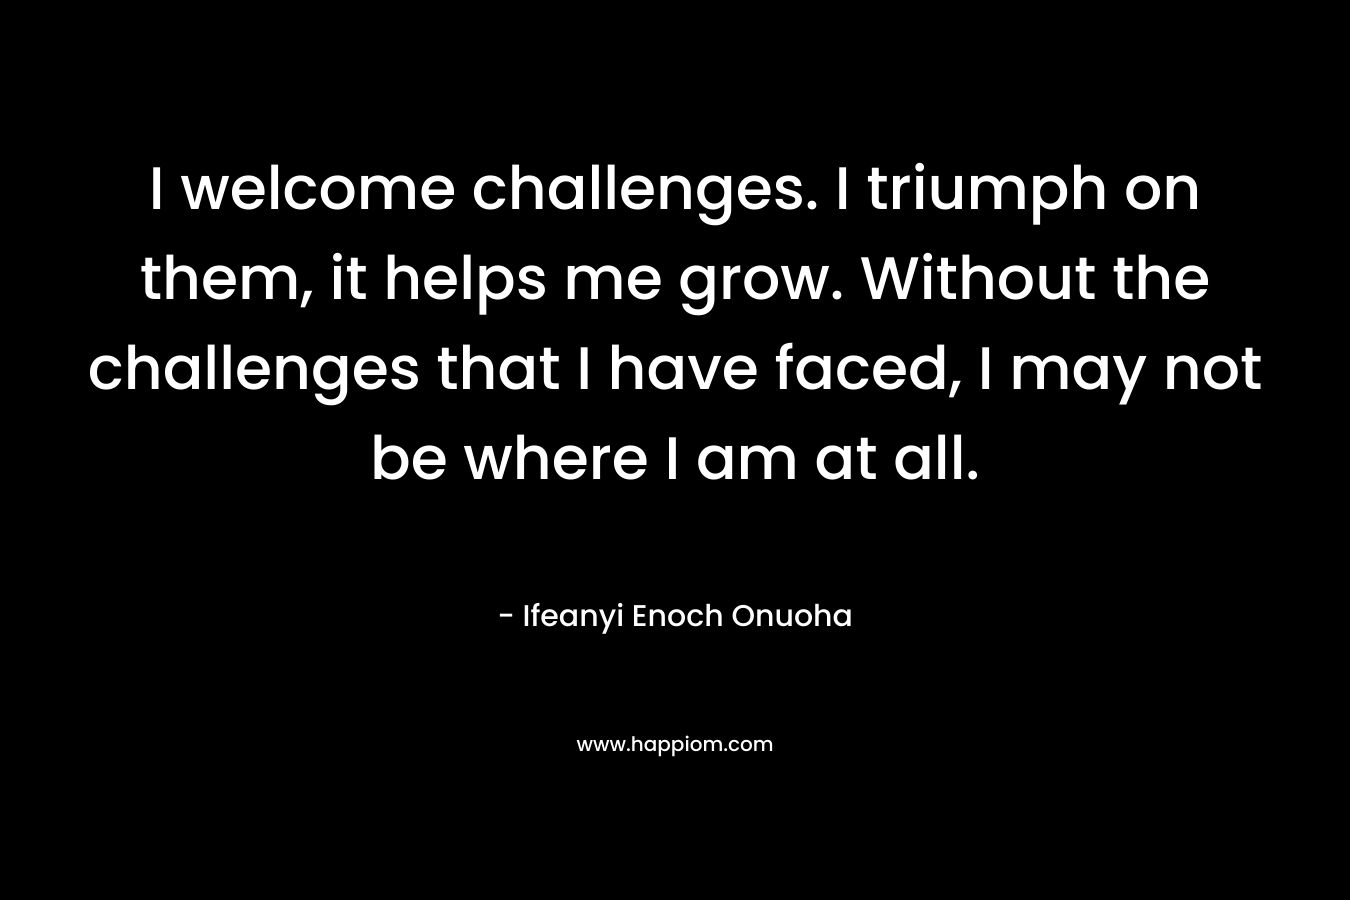 I welcome challenges. I triumph on them, it helps me grow. Without the challenges that I have faced, I may not be where I am at all. – Ifeanyi Enoch Onuoha